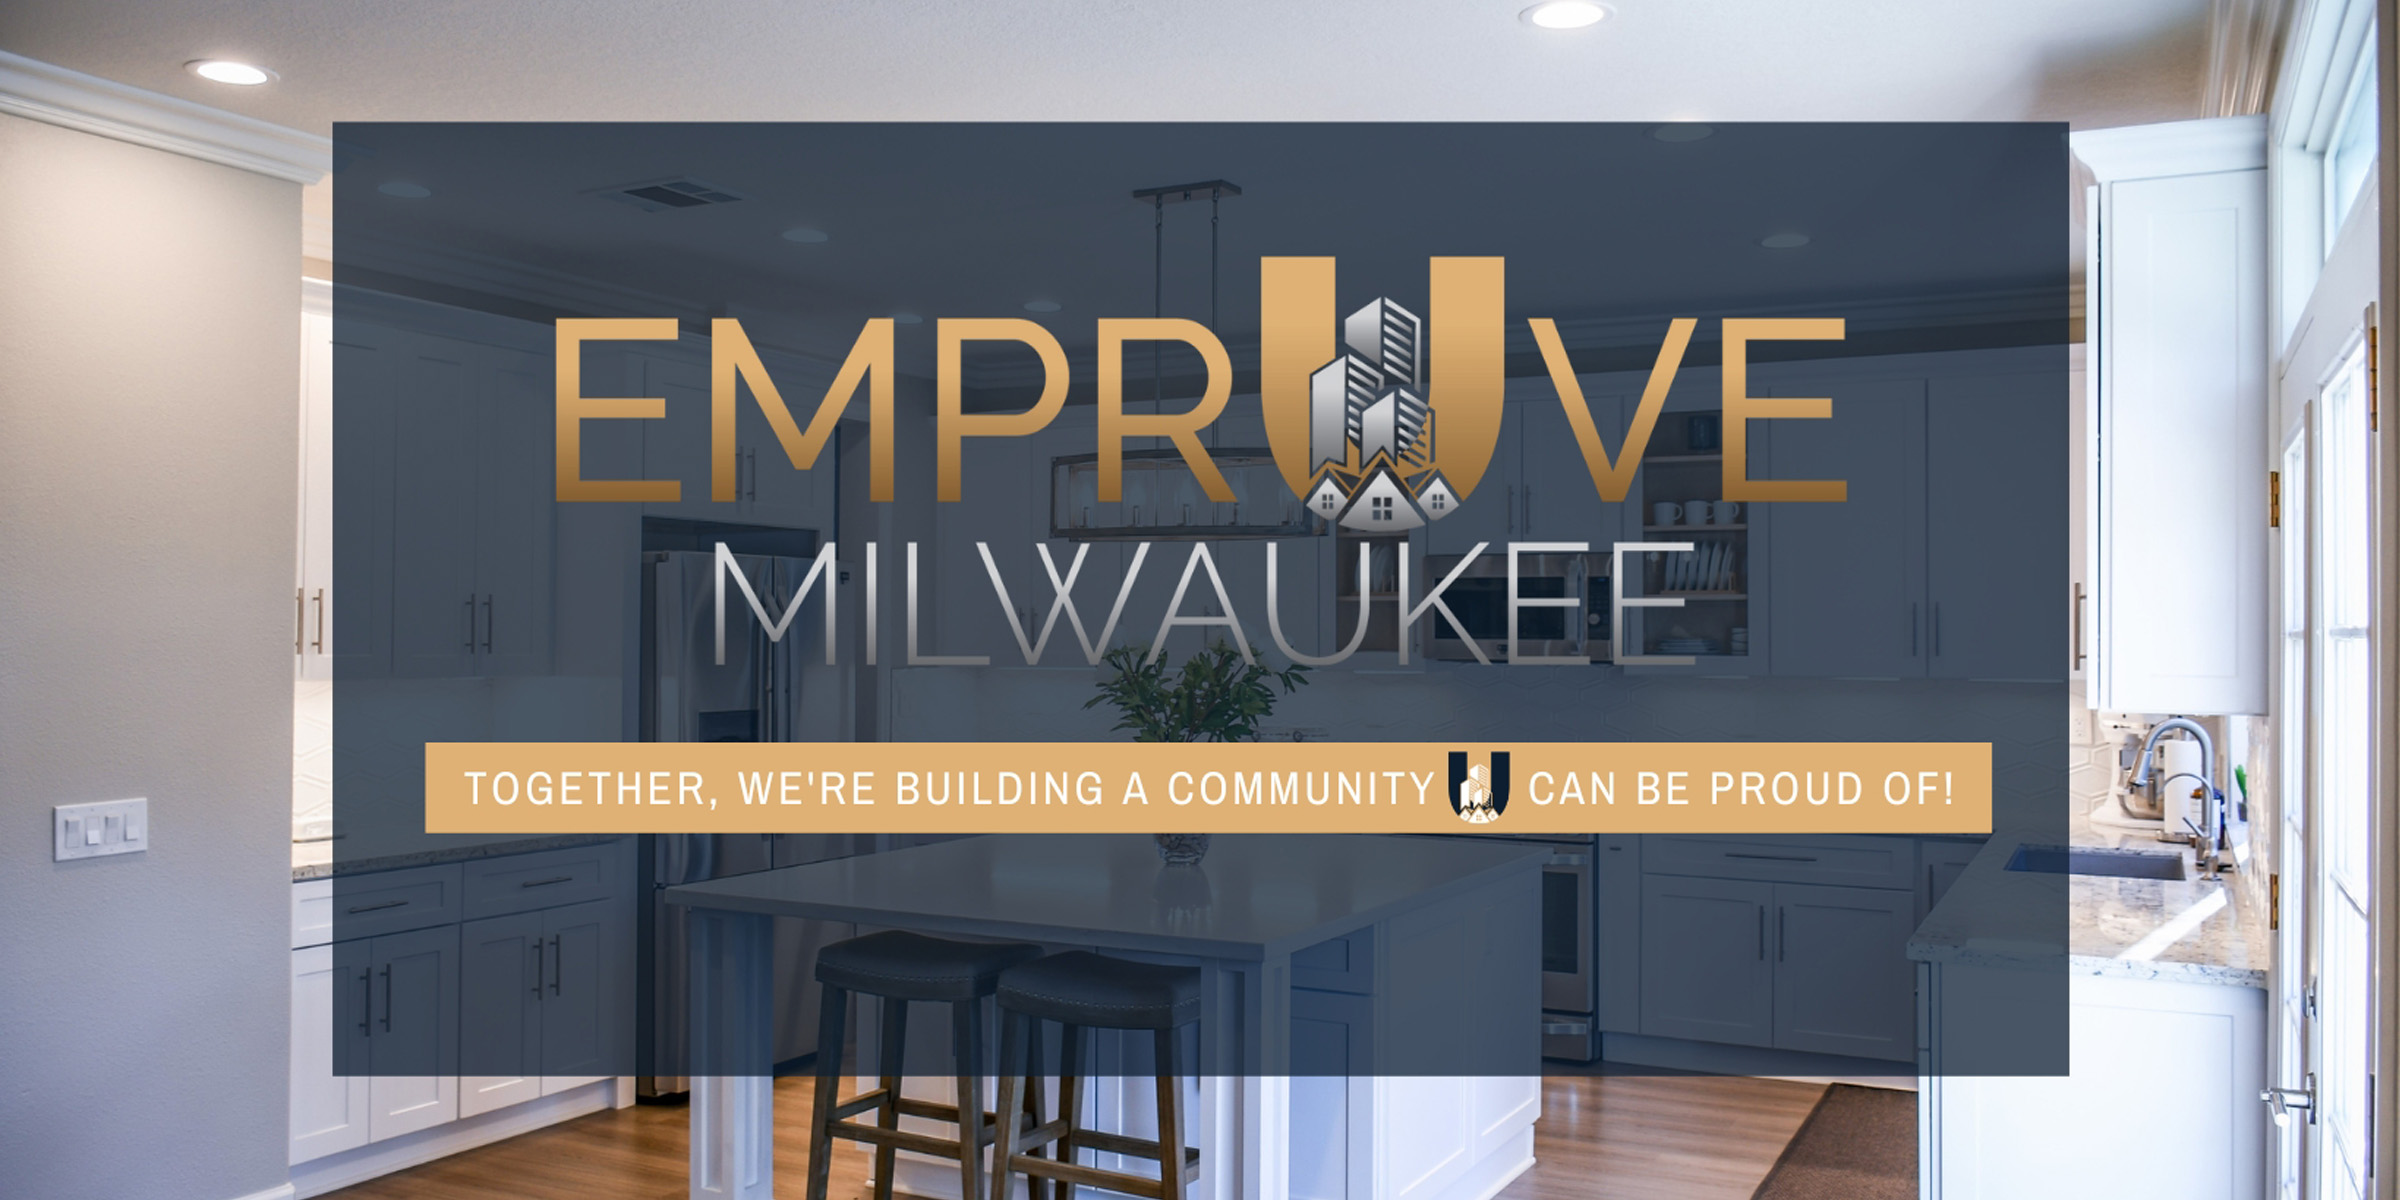 EmprUve: Pioneering a New Era of Thriving Communities and Homeownership